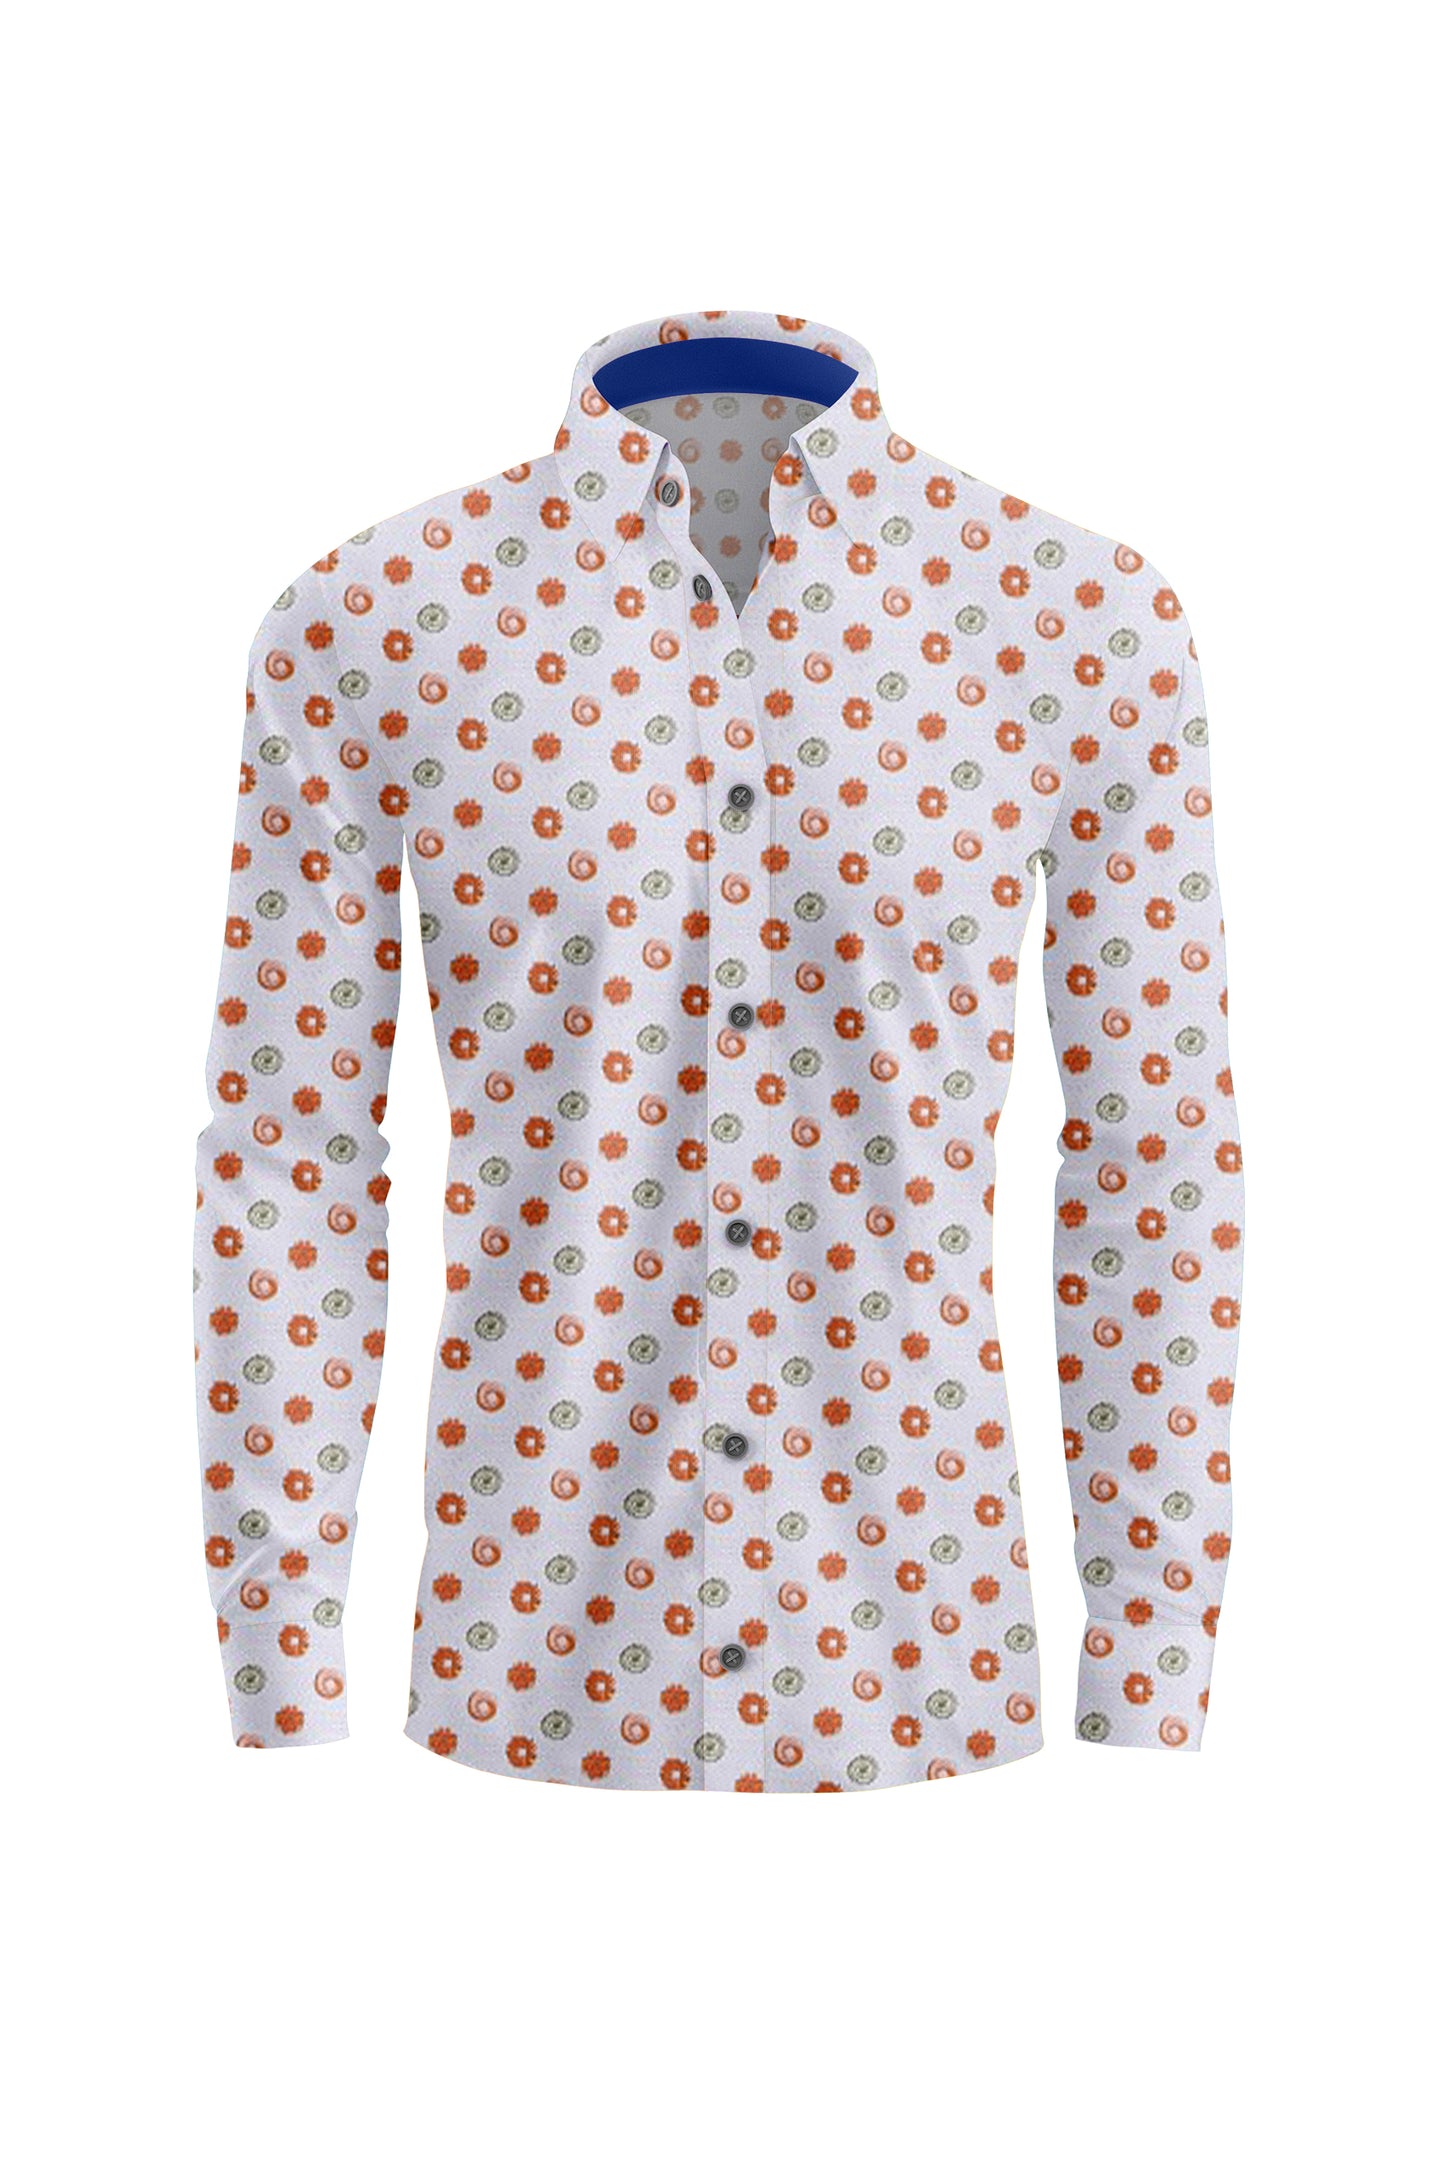 White Shirt With Red And Green Circles CASUAL SHIRT On Sale 30% Off Vercini